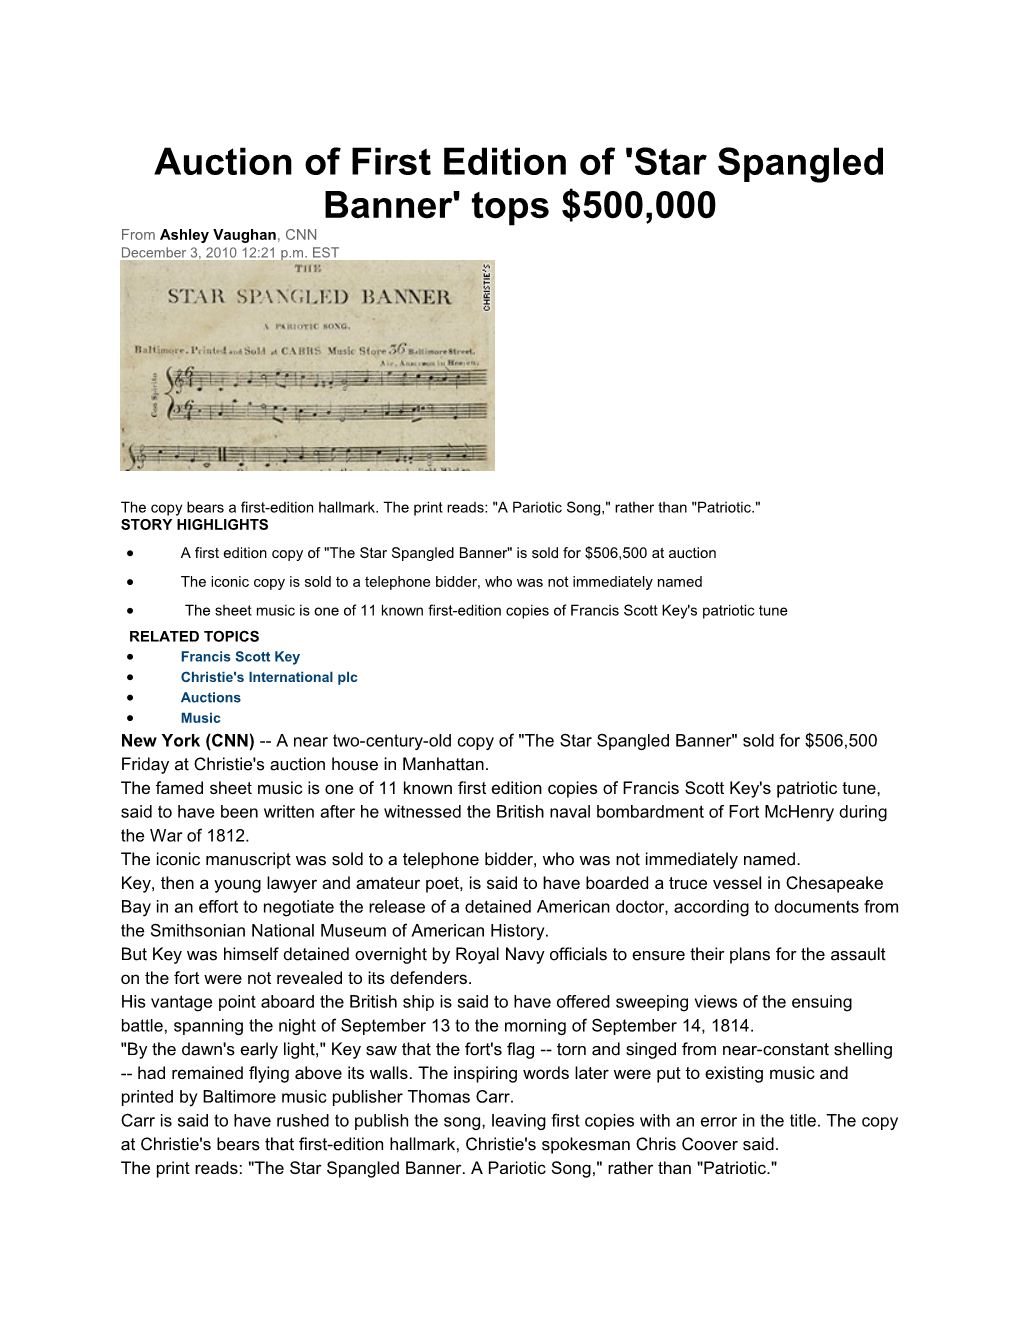 Auction of First Edition of 'Star Spangled Banner' Tops $500,000